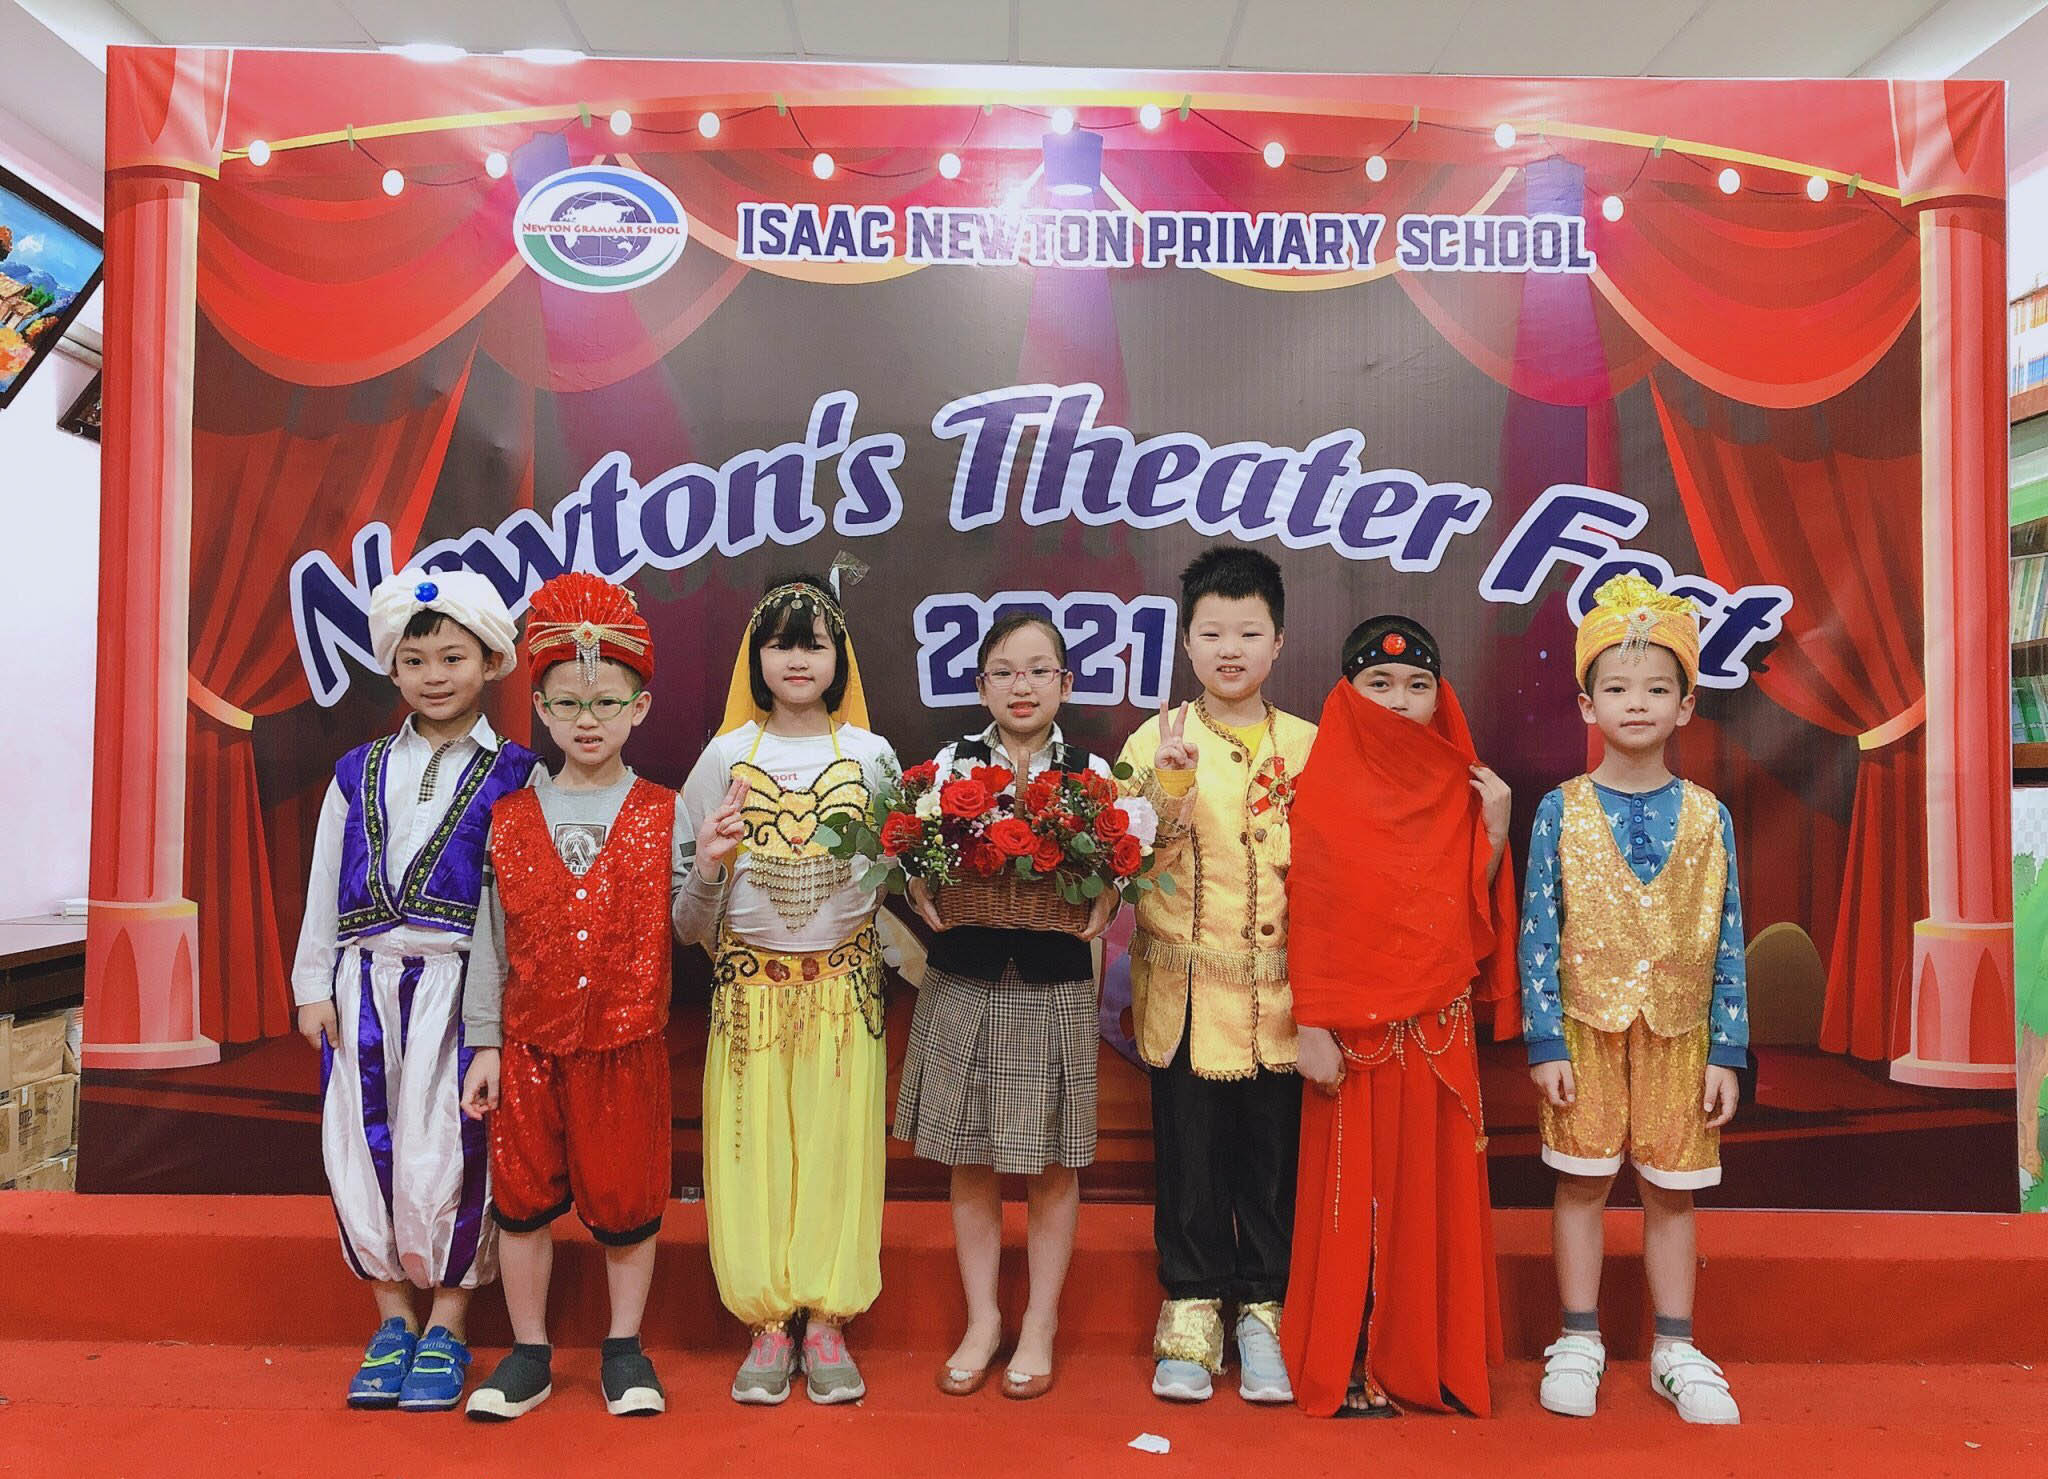 THEATER DAY